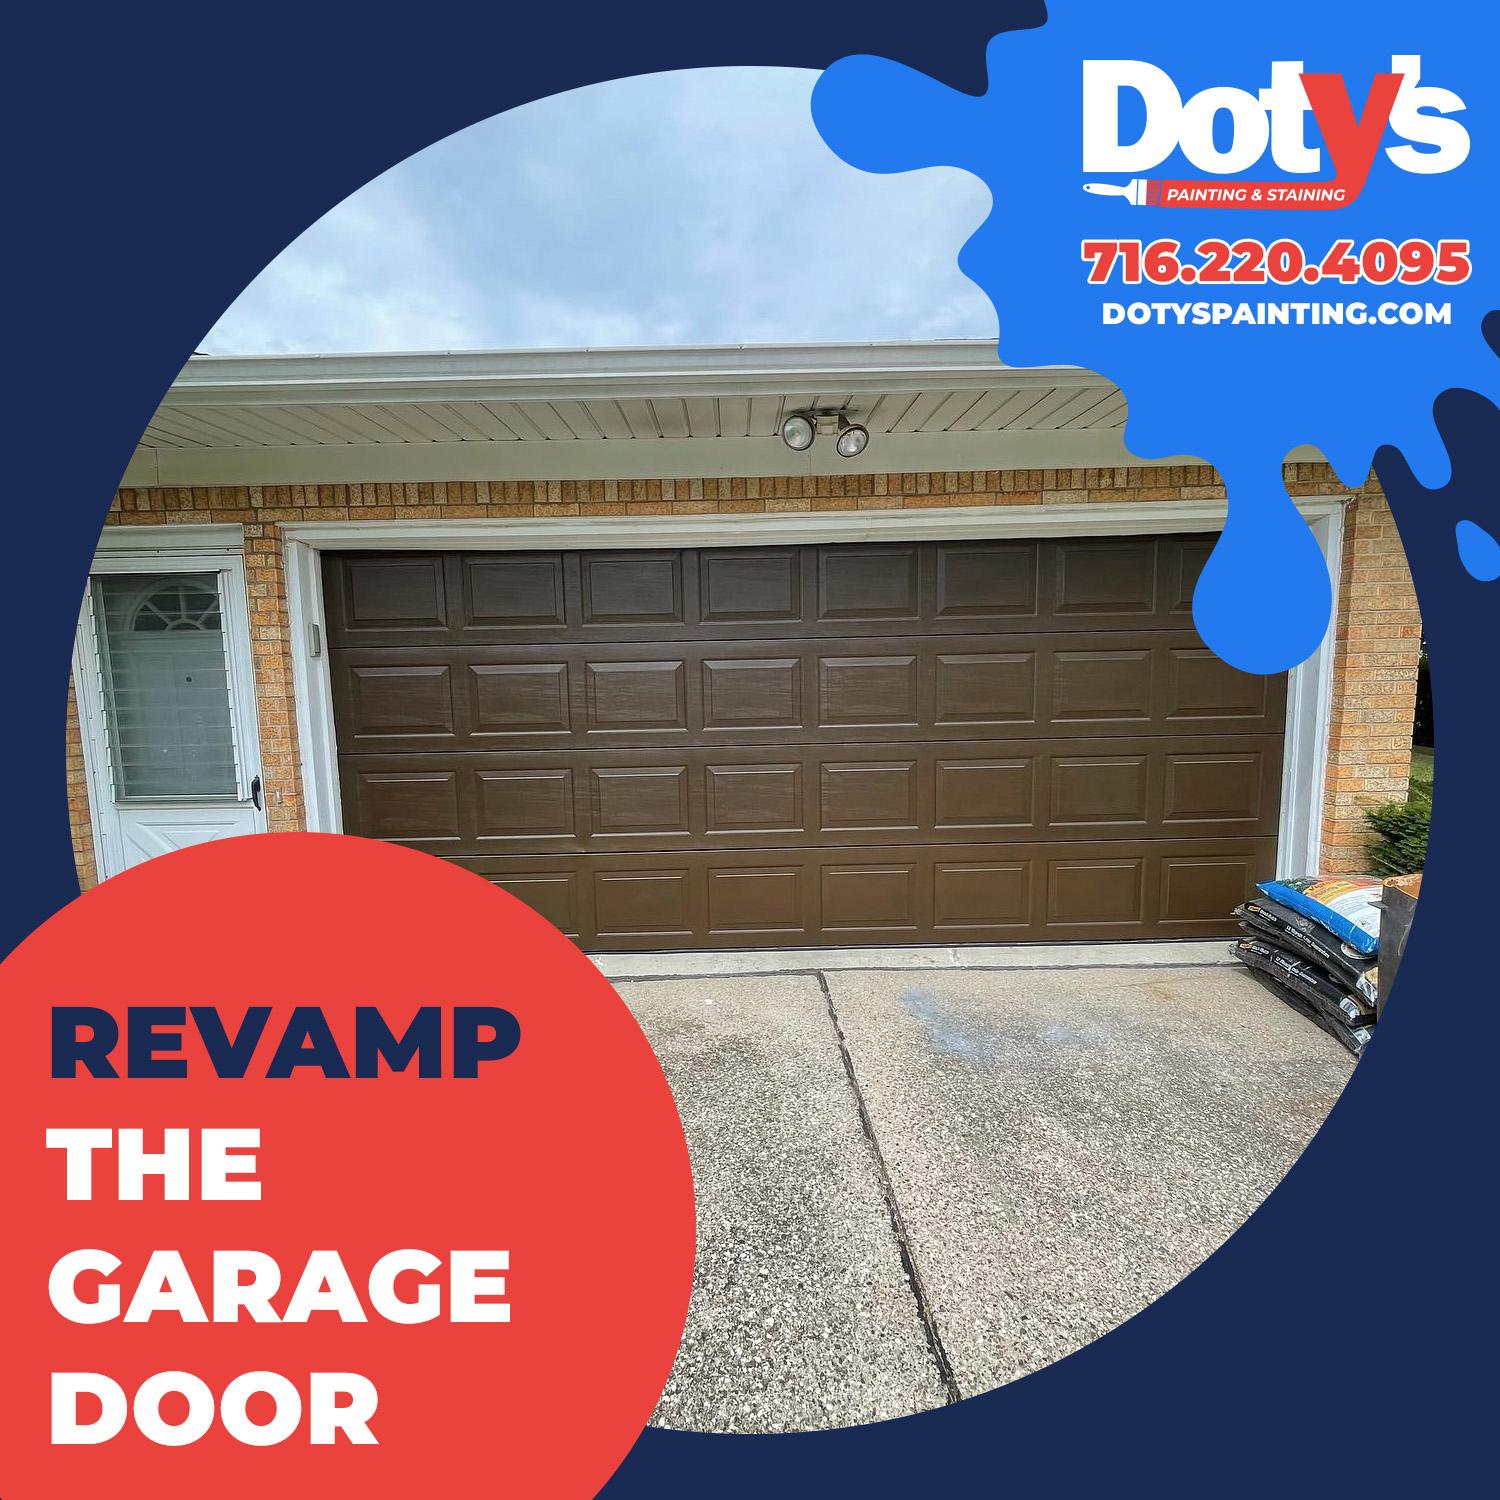 You are currently viewing Revamp the Garage Door